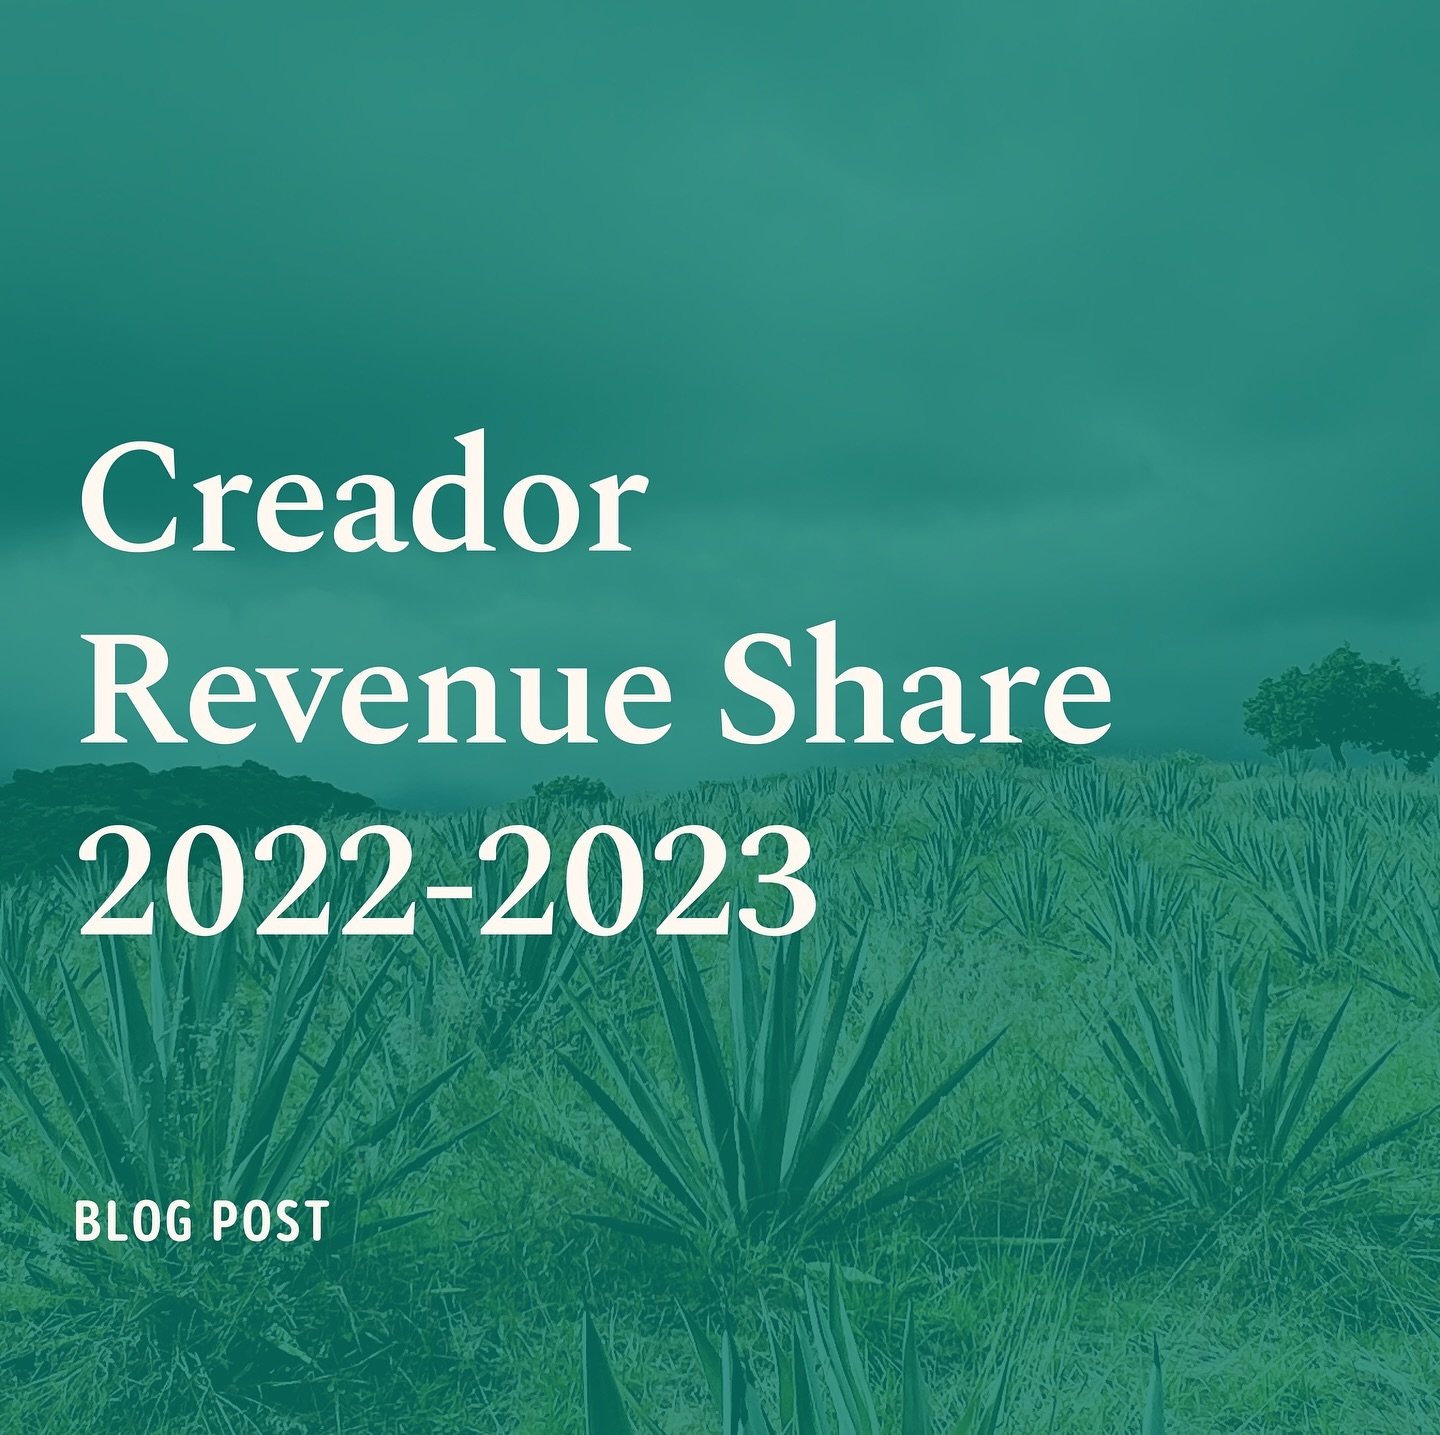 In January 2024 Creador reached a milestone, one set during the formation of the project - to be able to pay a portion of revenue to the producers.

Read more: https://www.creadorspirits.com/blog

#destiladodeagave
#agavespirits
#palenque
#claypotfer